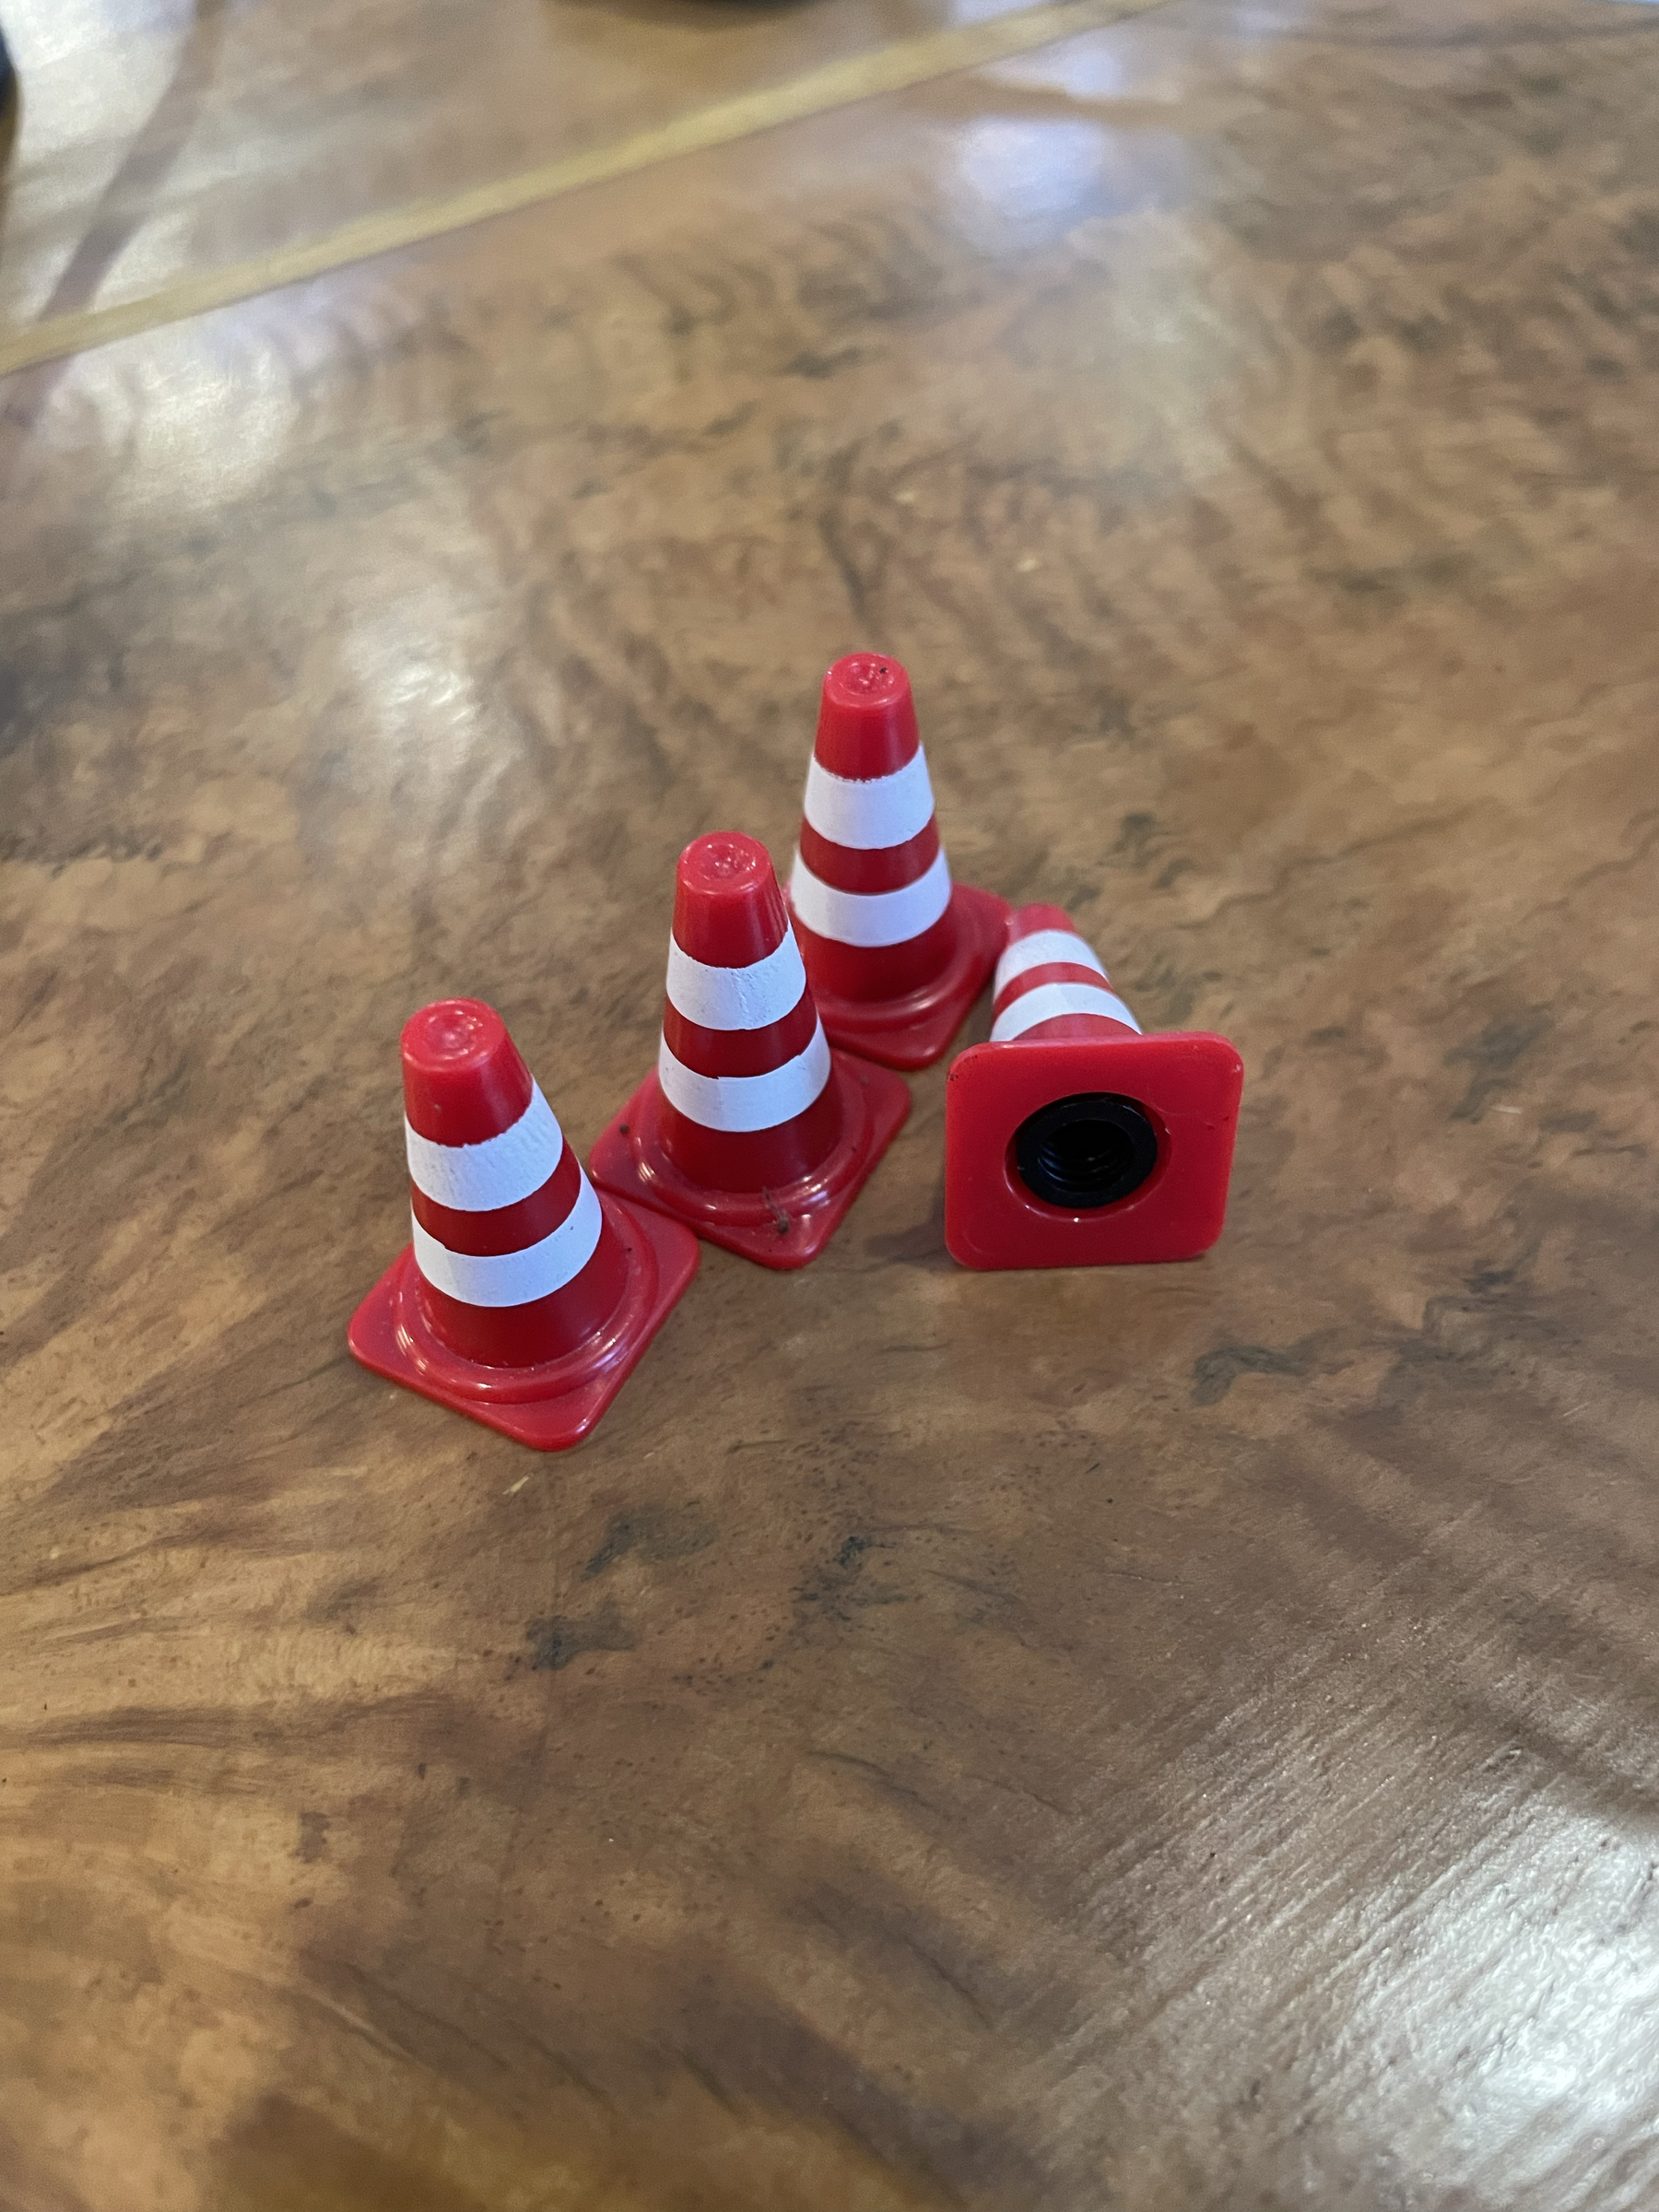 photo of 4 3d-printed traffic cone valve caps on a table, with 1 tipped over to show the valve cap part